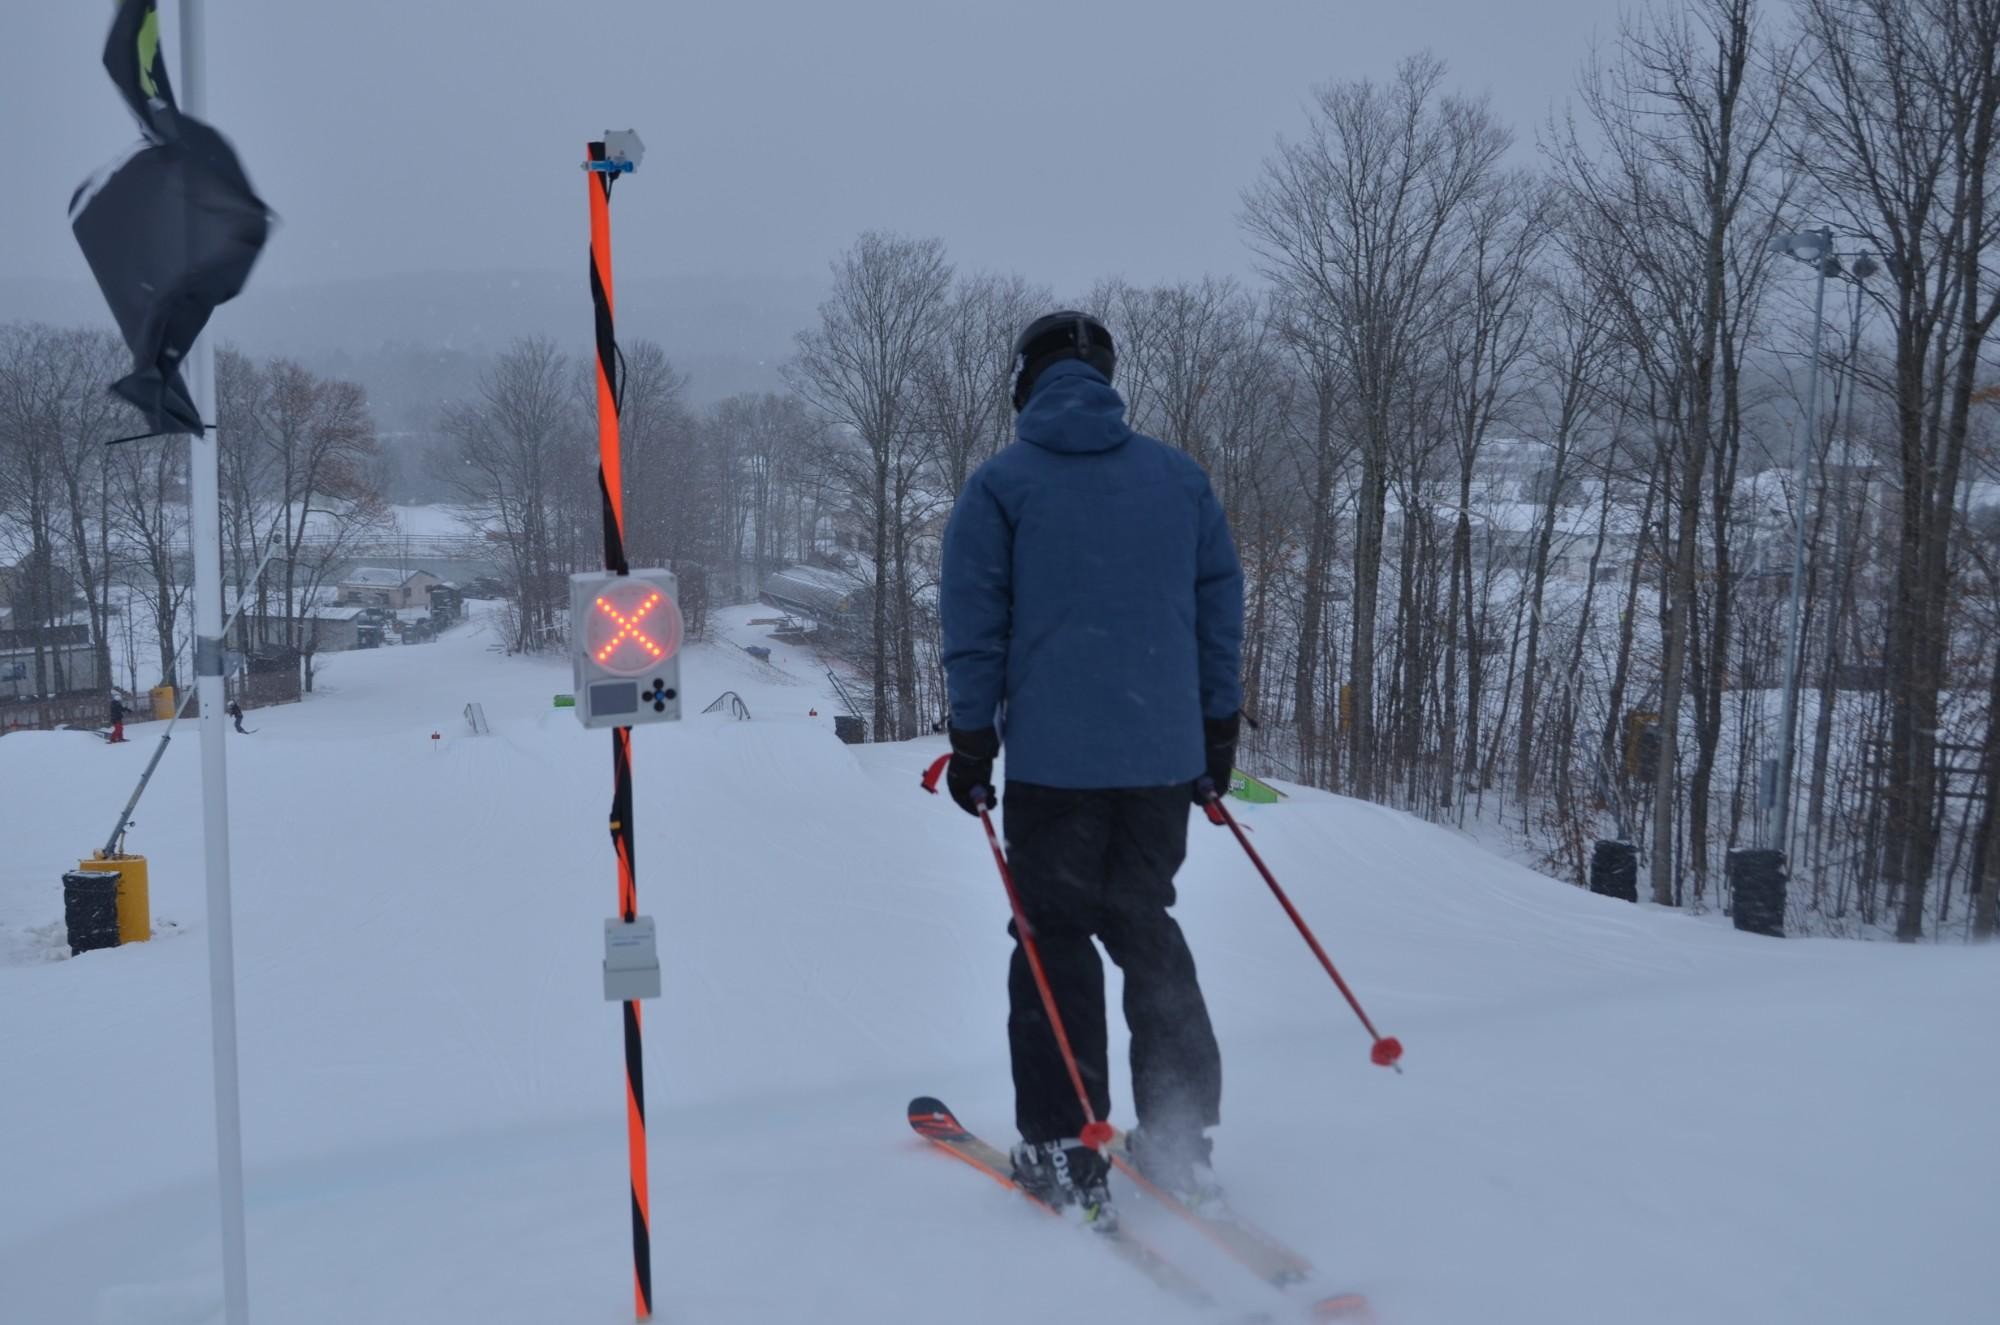 Mount St Louis Moonstone Launches Testing with VSTech’s SmartPatrol Technology for Terrain Parks ...